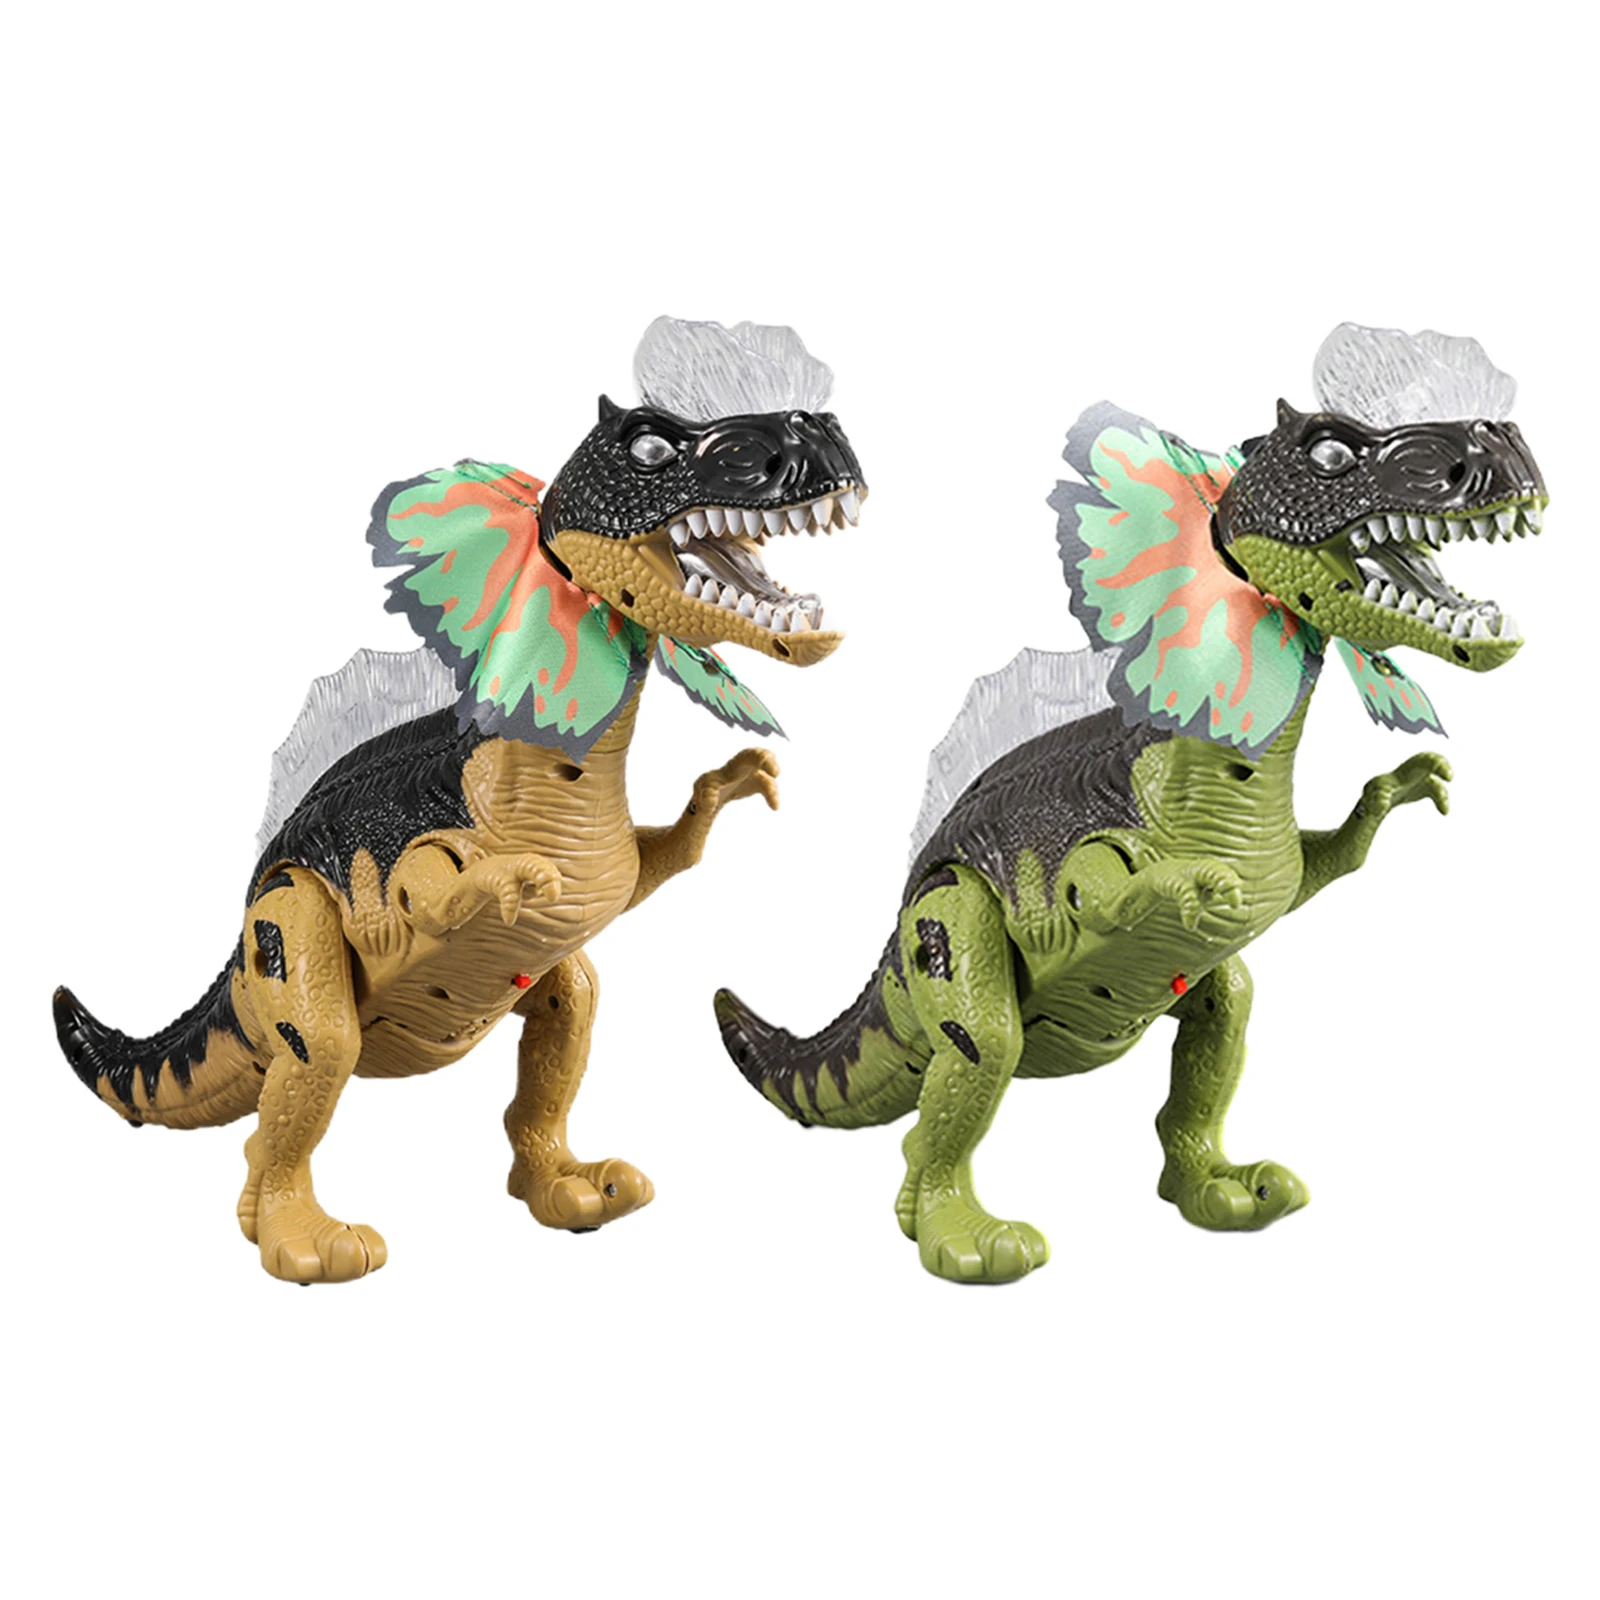 ABS Electronic Walking Dinosaur Walking Roaring Battery Powered Supplies Attractive Model Double Crested Dinosaur for Boys Child